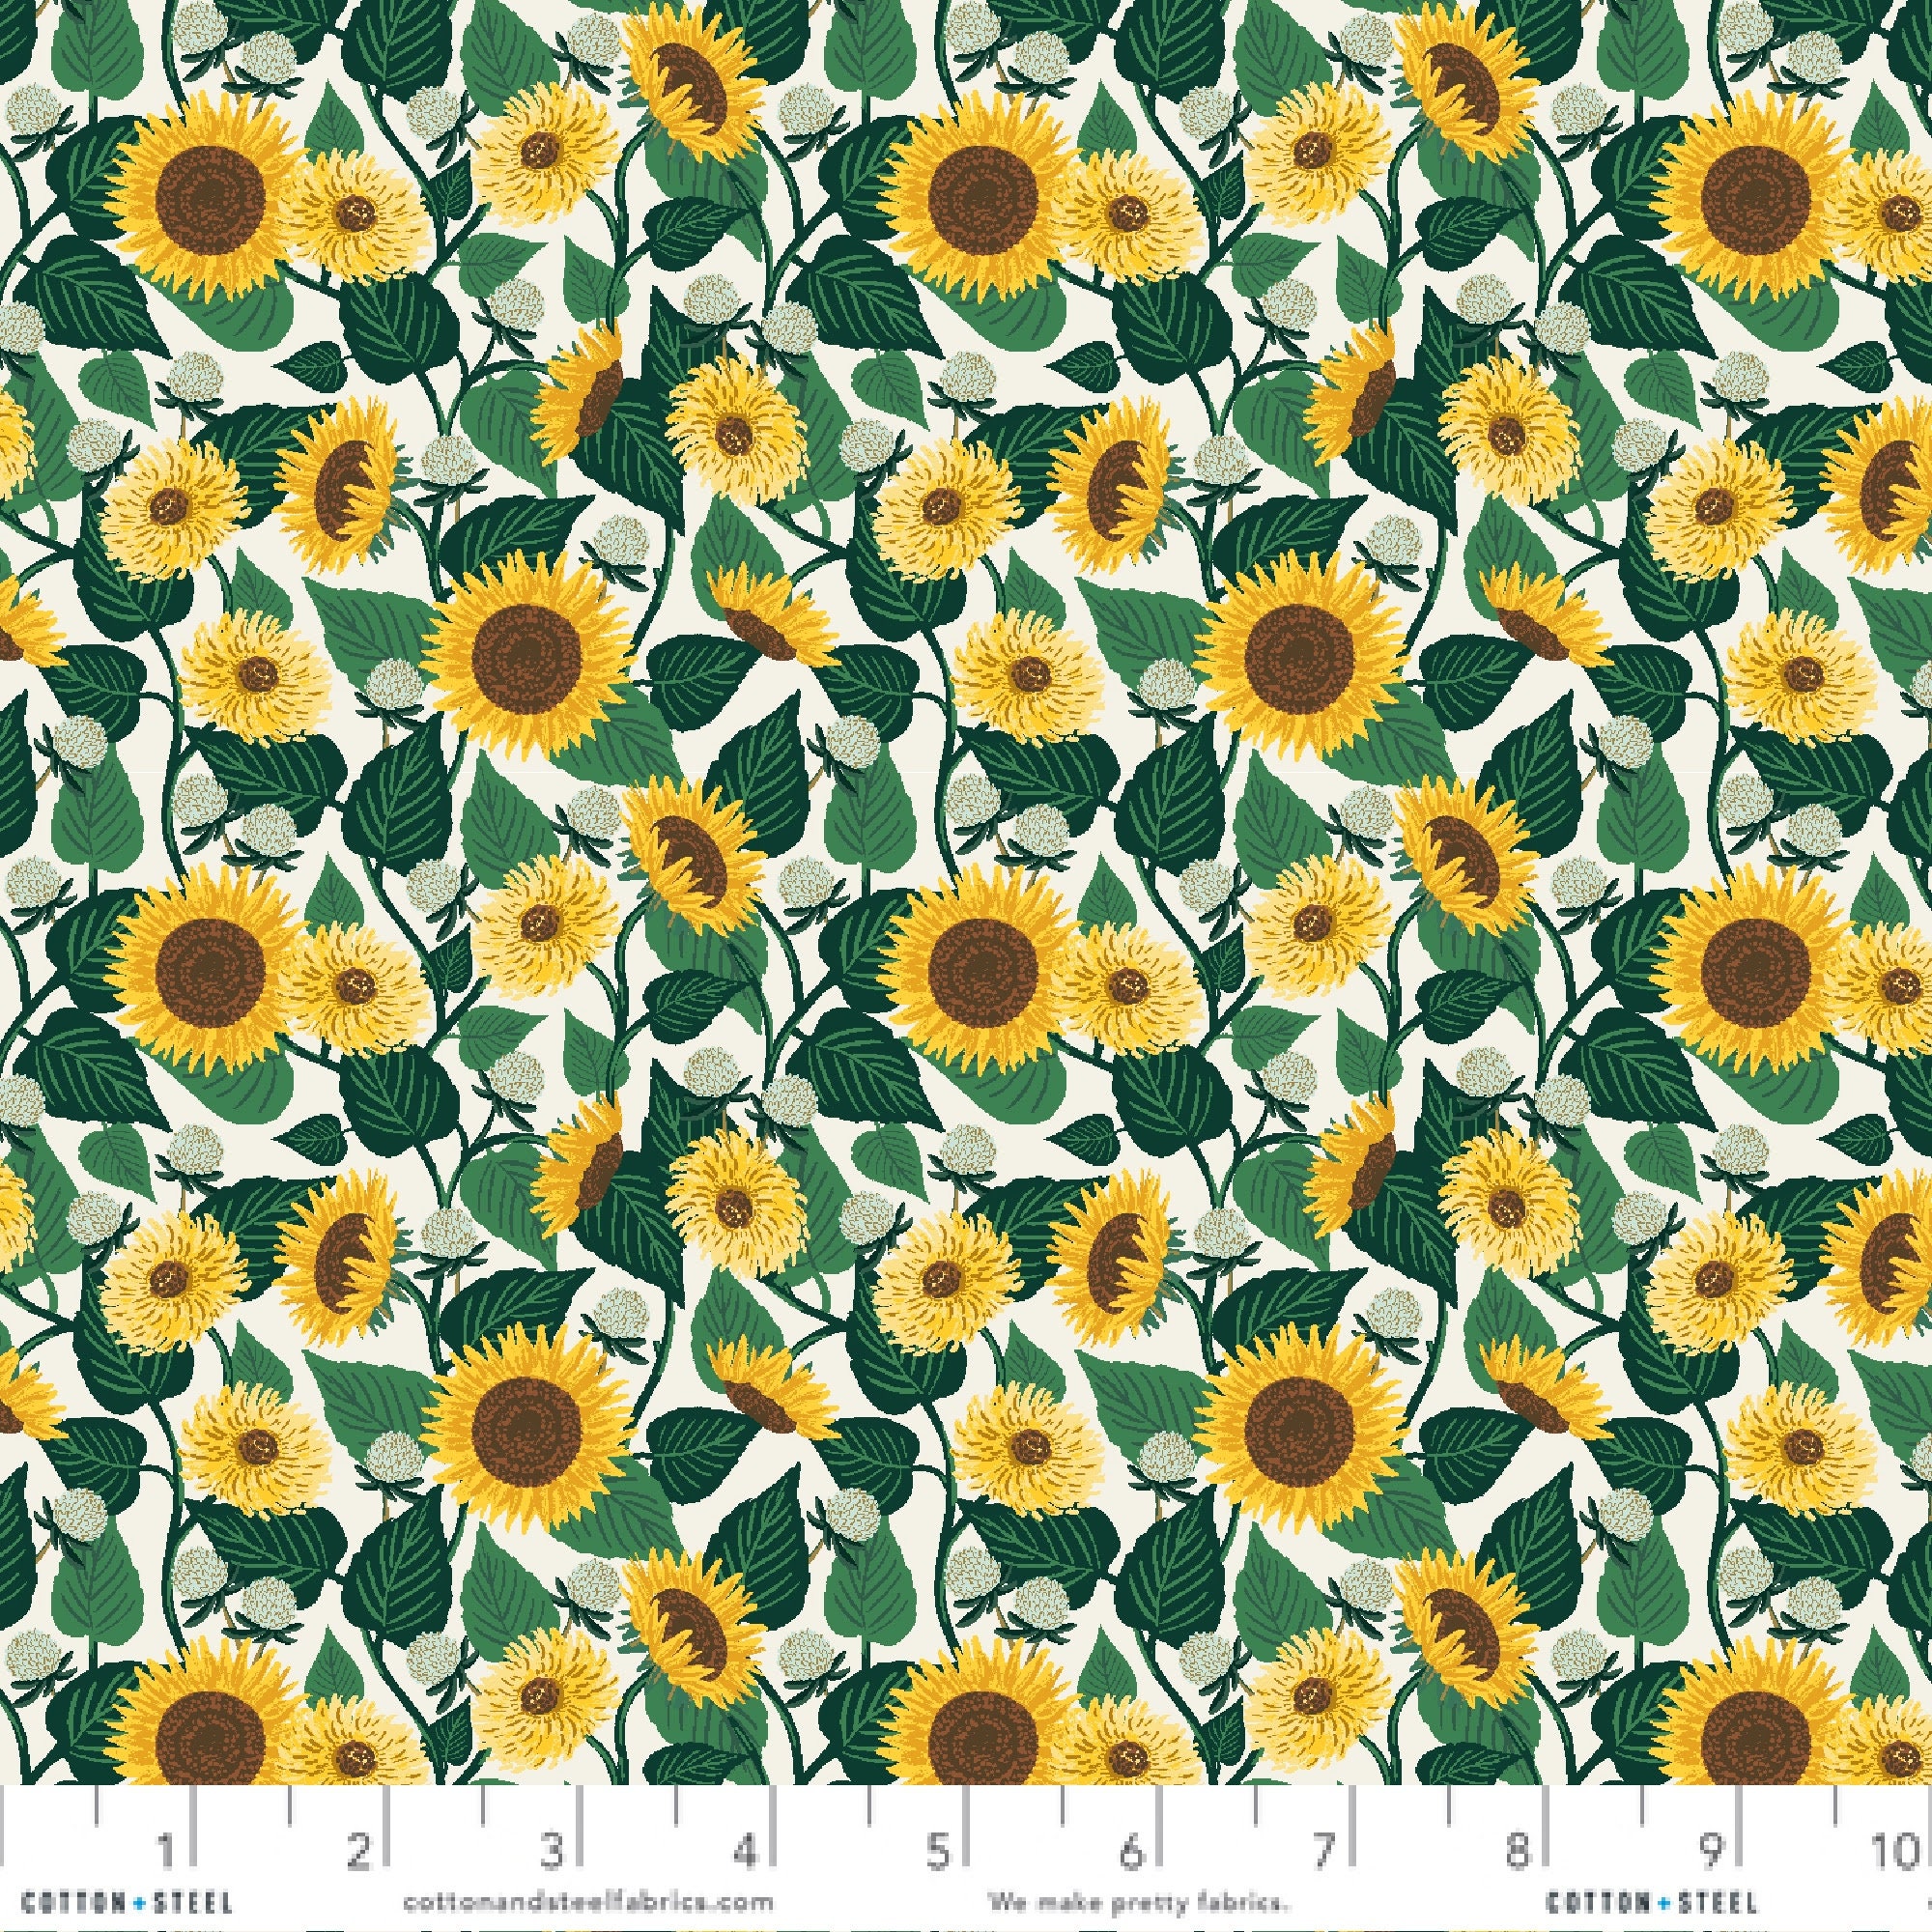 Sunflower Fabric by The Yard 3D Floral Upholstery Fabric Yellow Flowers  Indoor Outdoor Fabric Botanical Floral Print Girly Romantic Decorative  Fabric